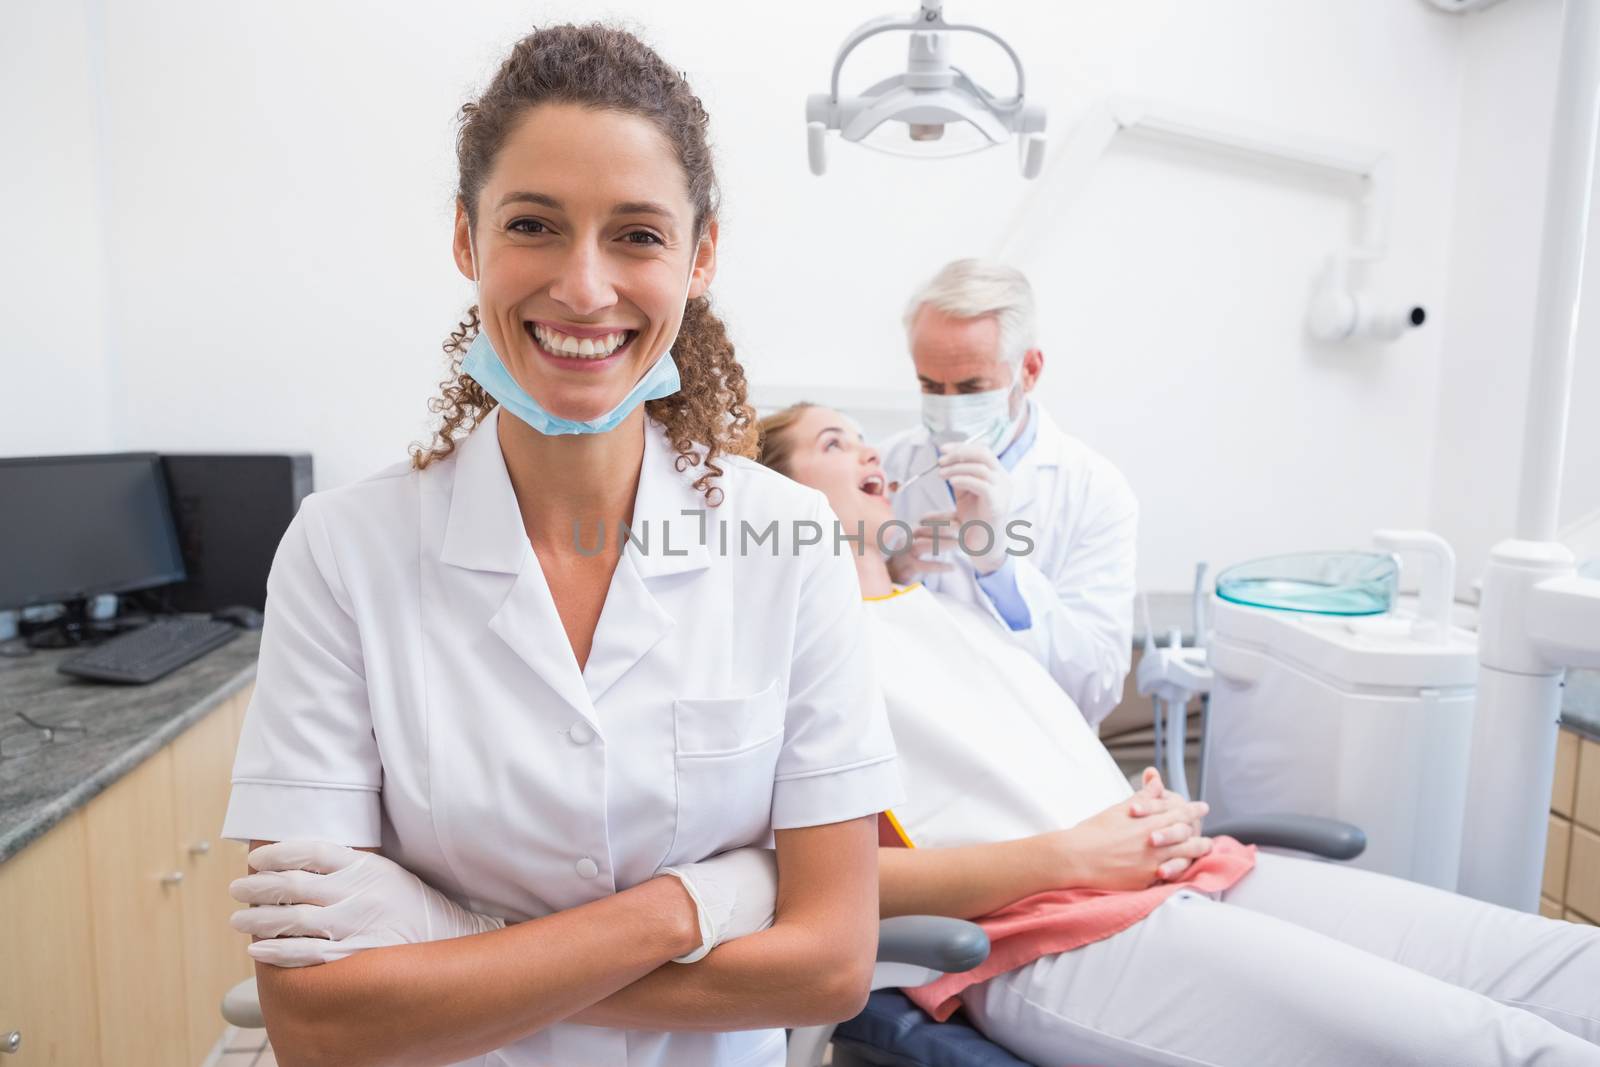 Dental assistant smiling at camera with dentist and patient behind by Wavebreakmedia